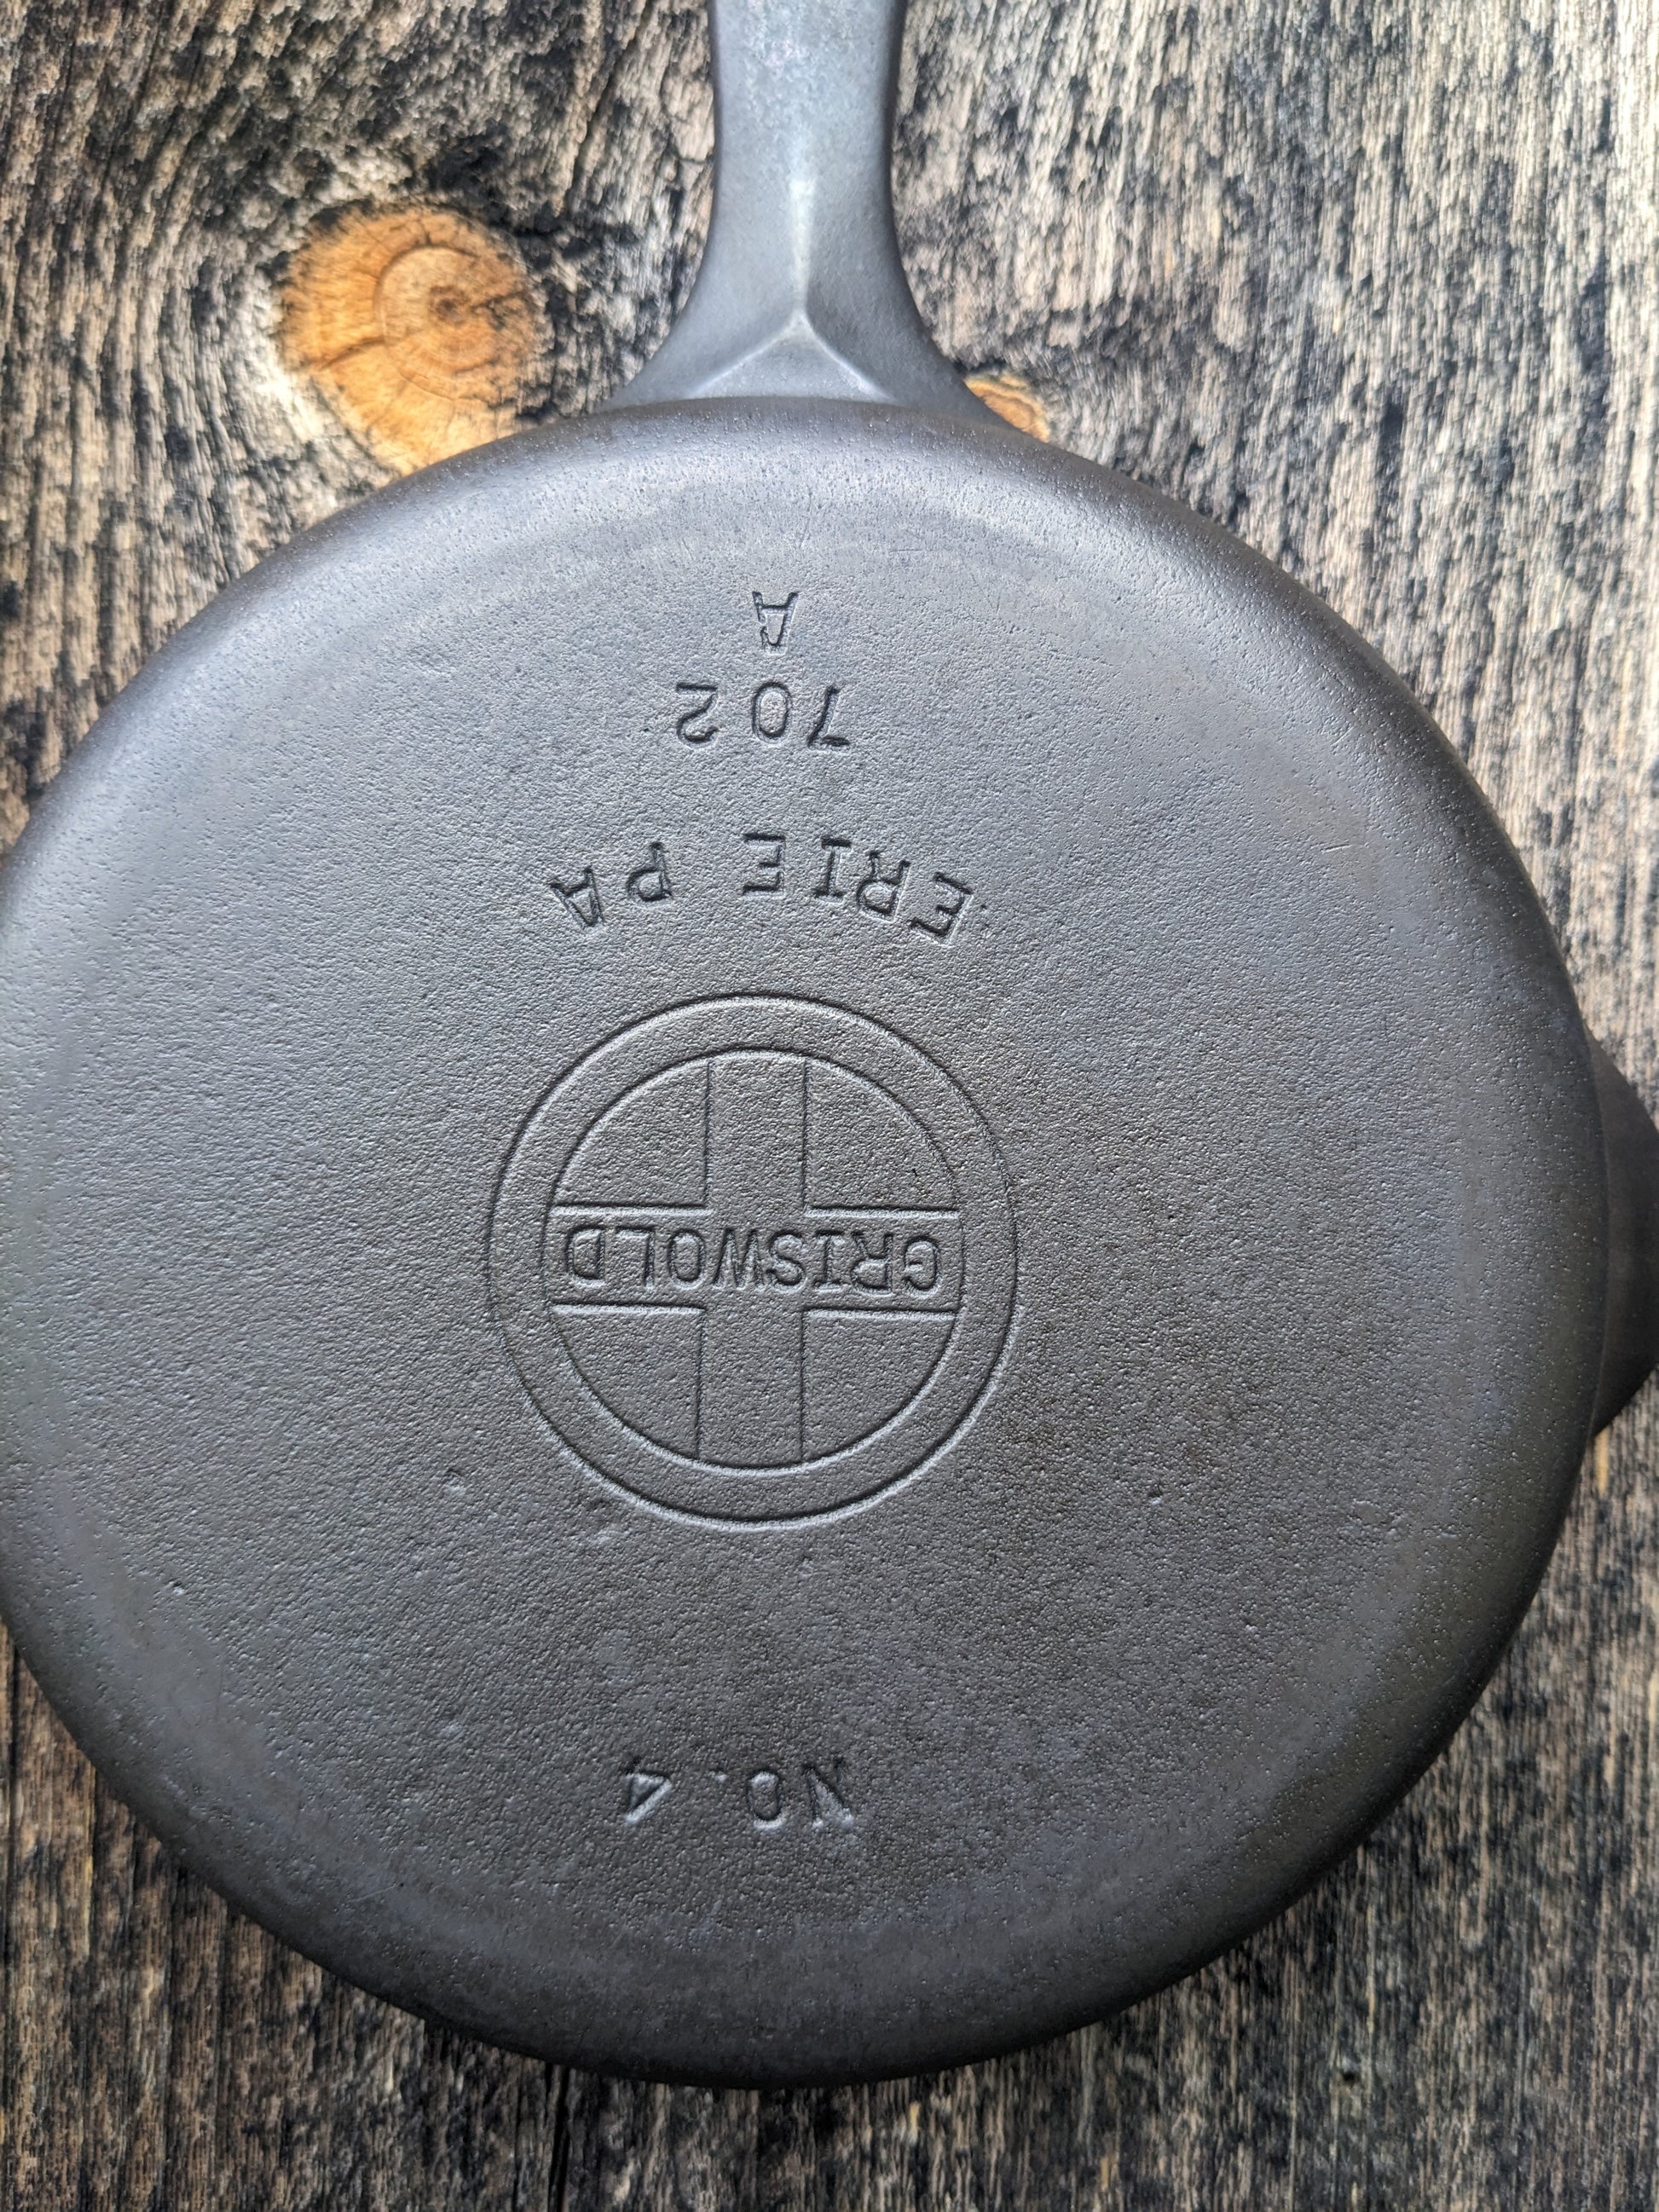 Griswold Cast Iron Cookware Part 1 